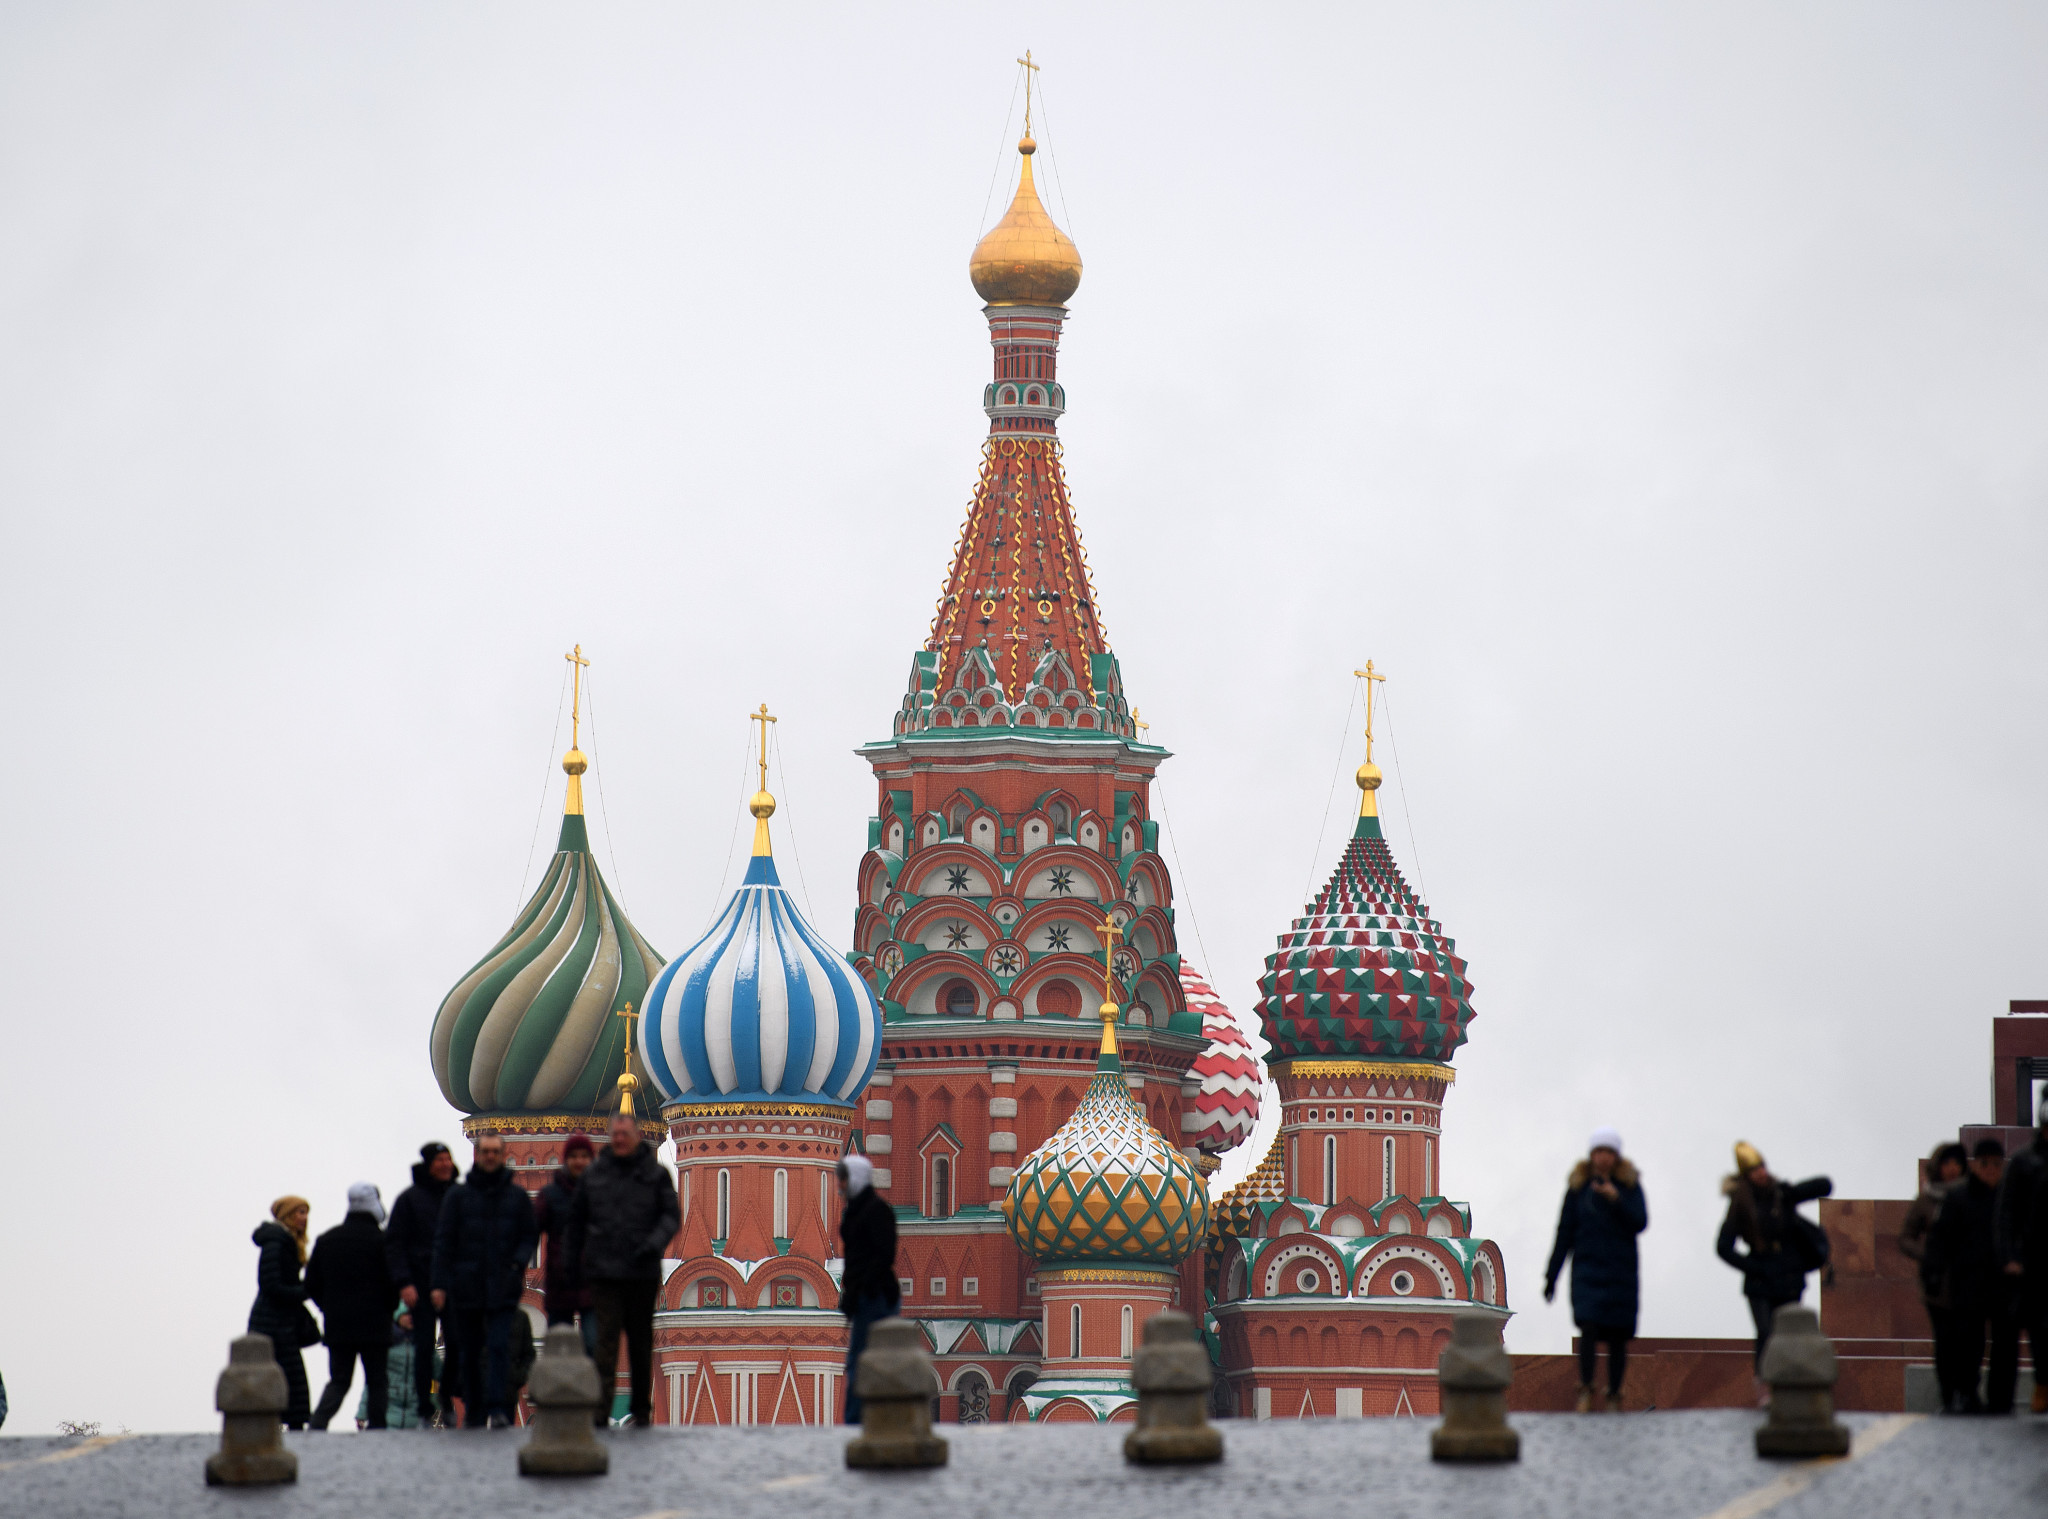 Moscow is preparing to stage the 2018 World Cup draw ©Getty Images